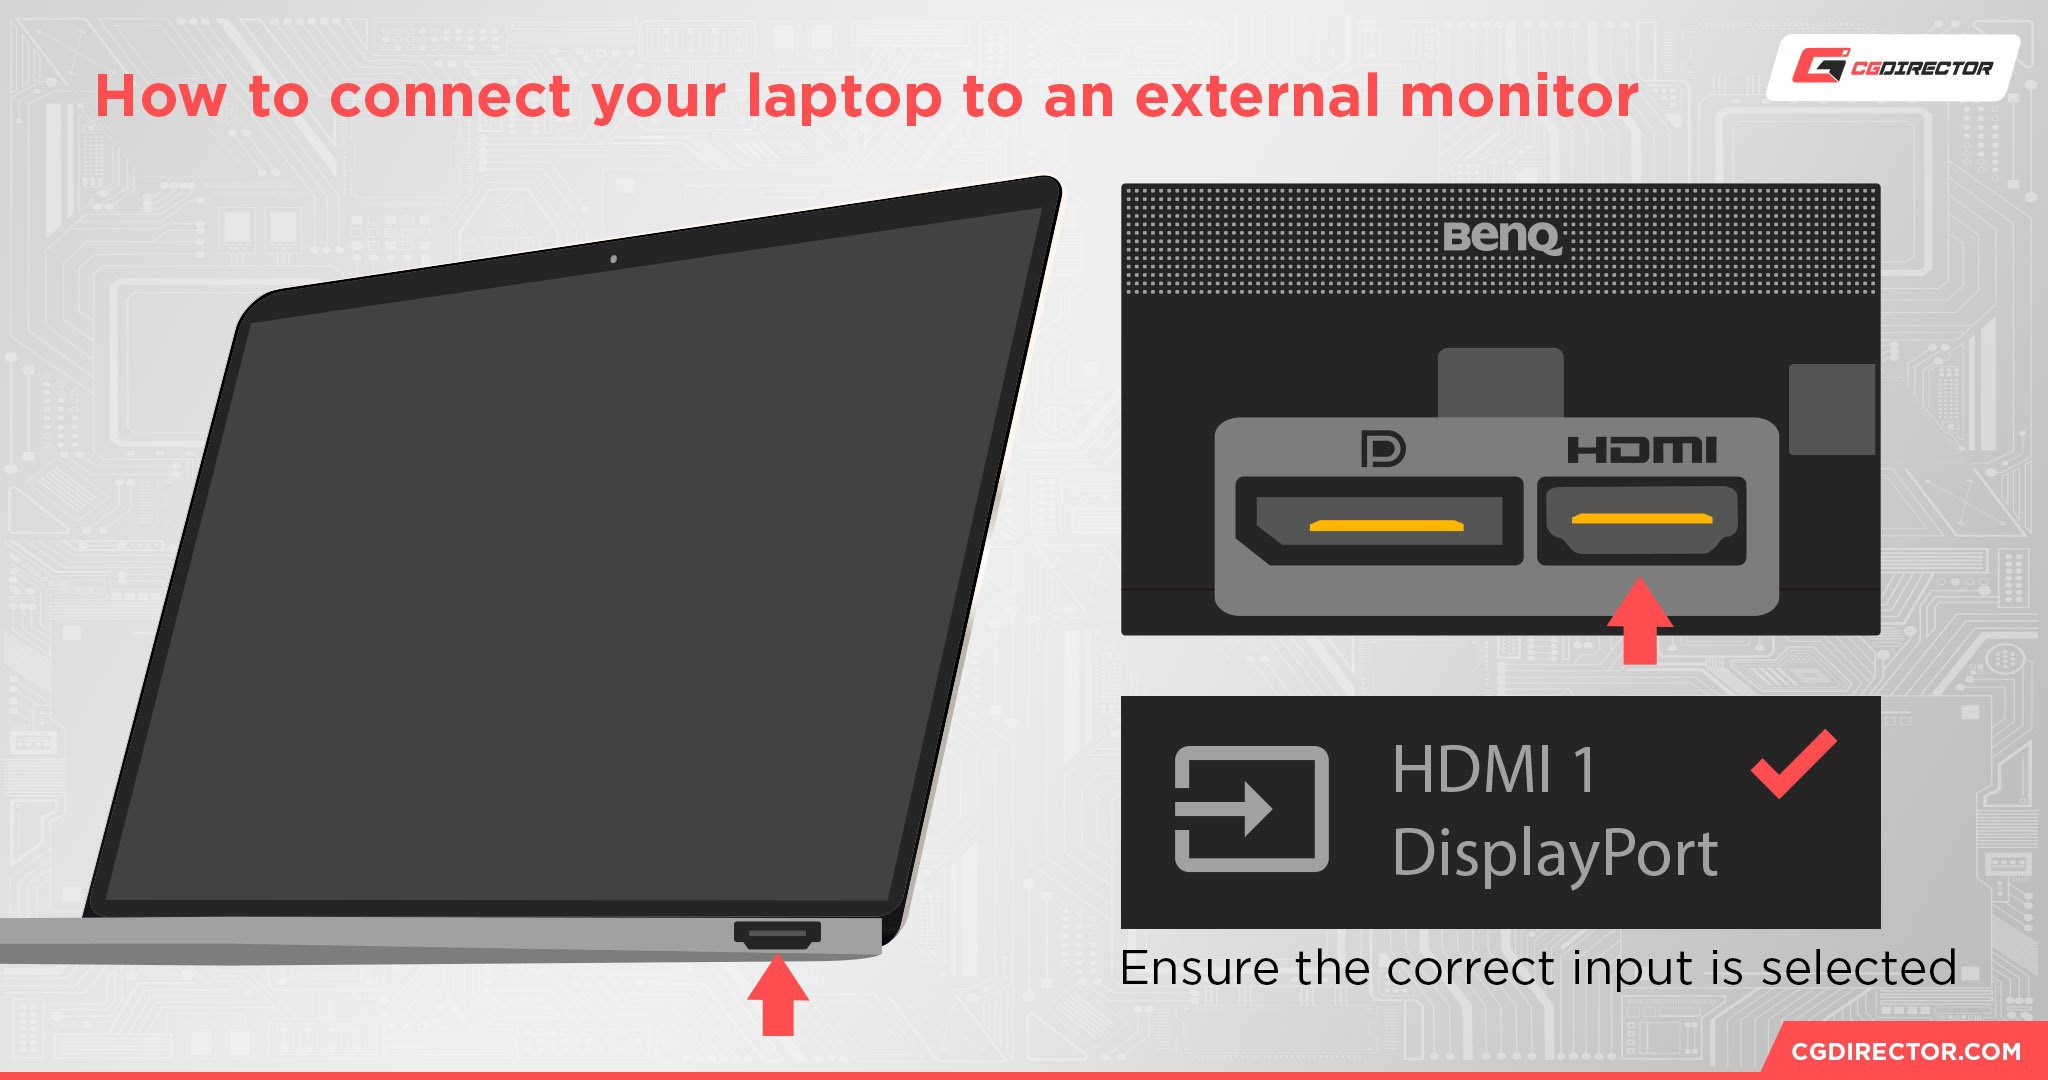 How to connect your laptop to an external monitor